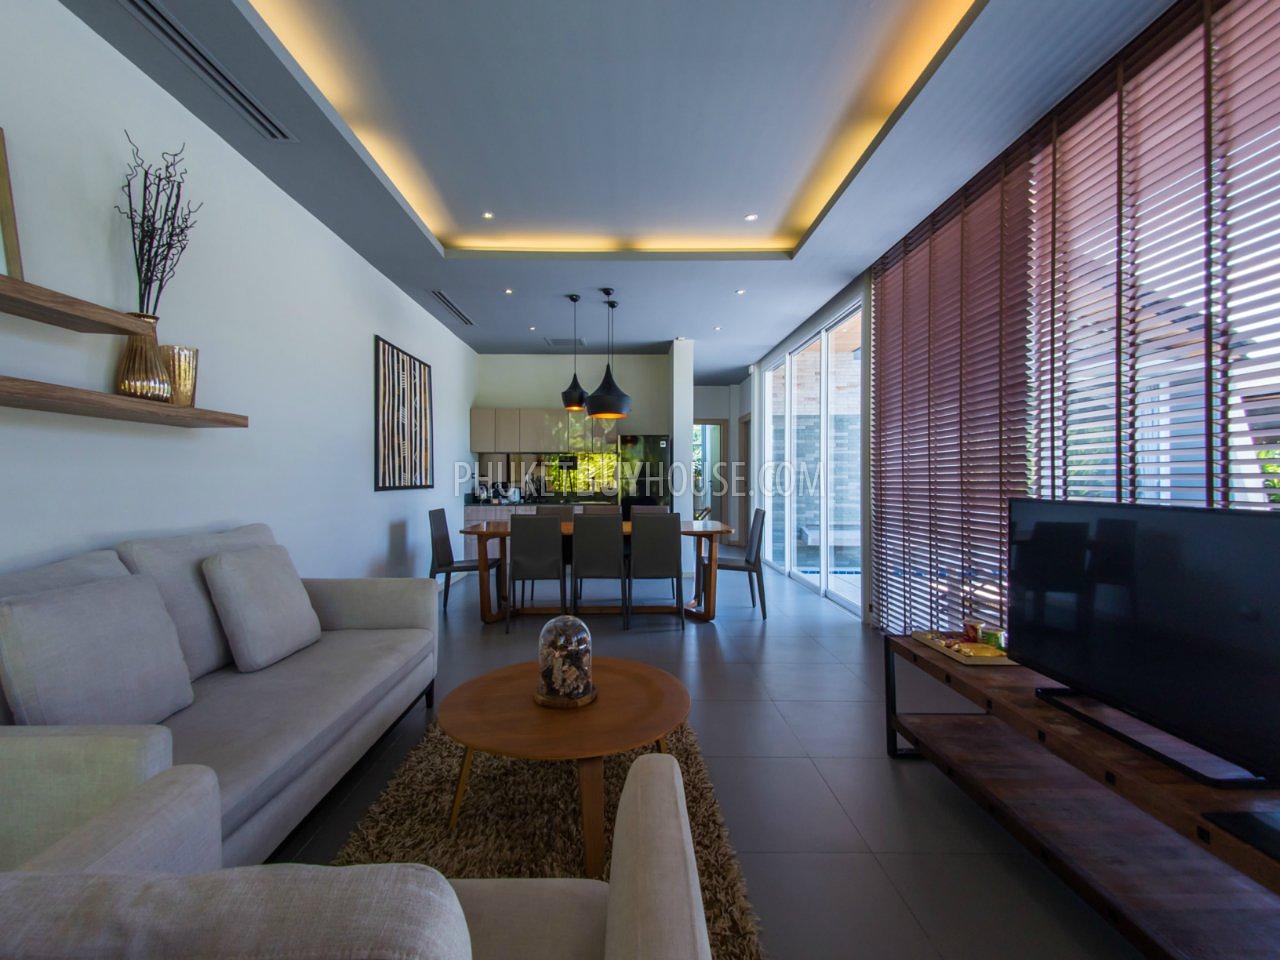 LAY4525: Tropical modern villa with 4 bedrooms on Phuket. Photo #30